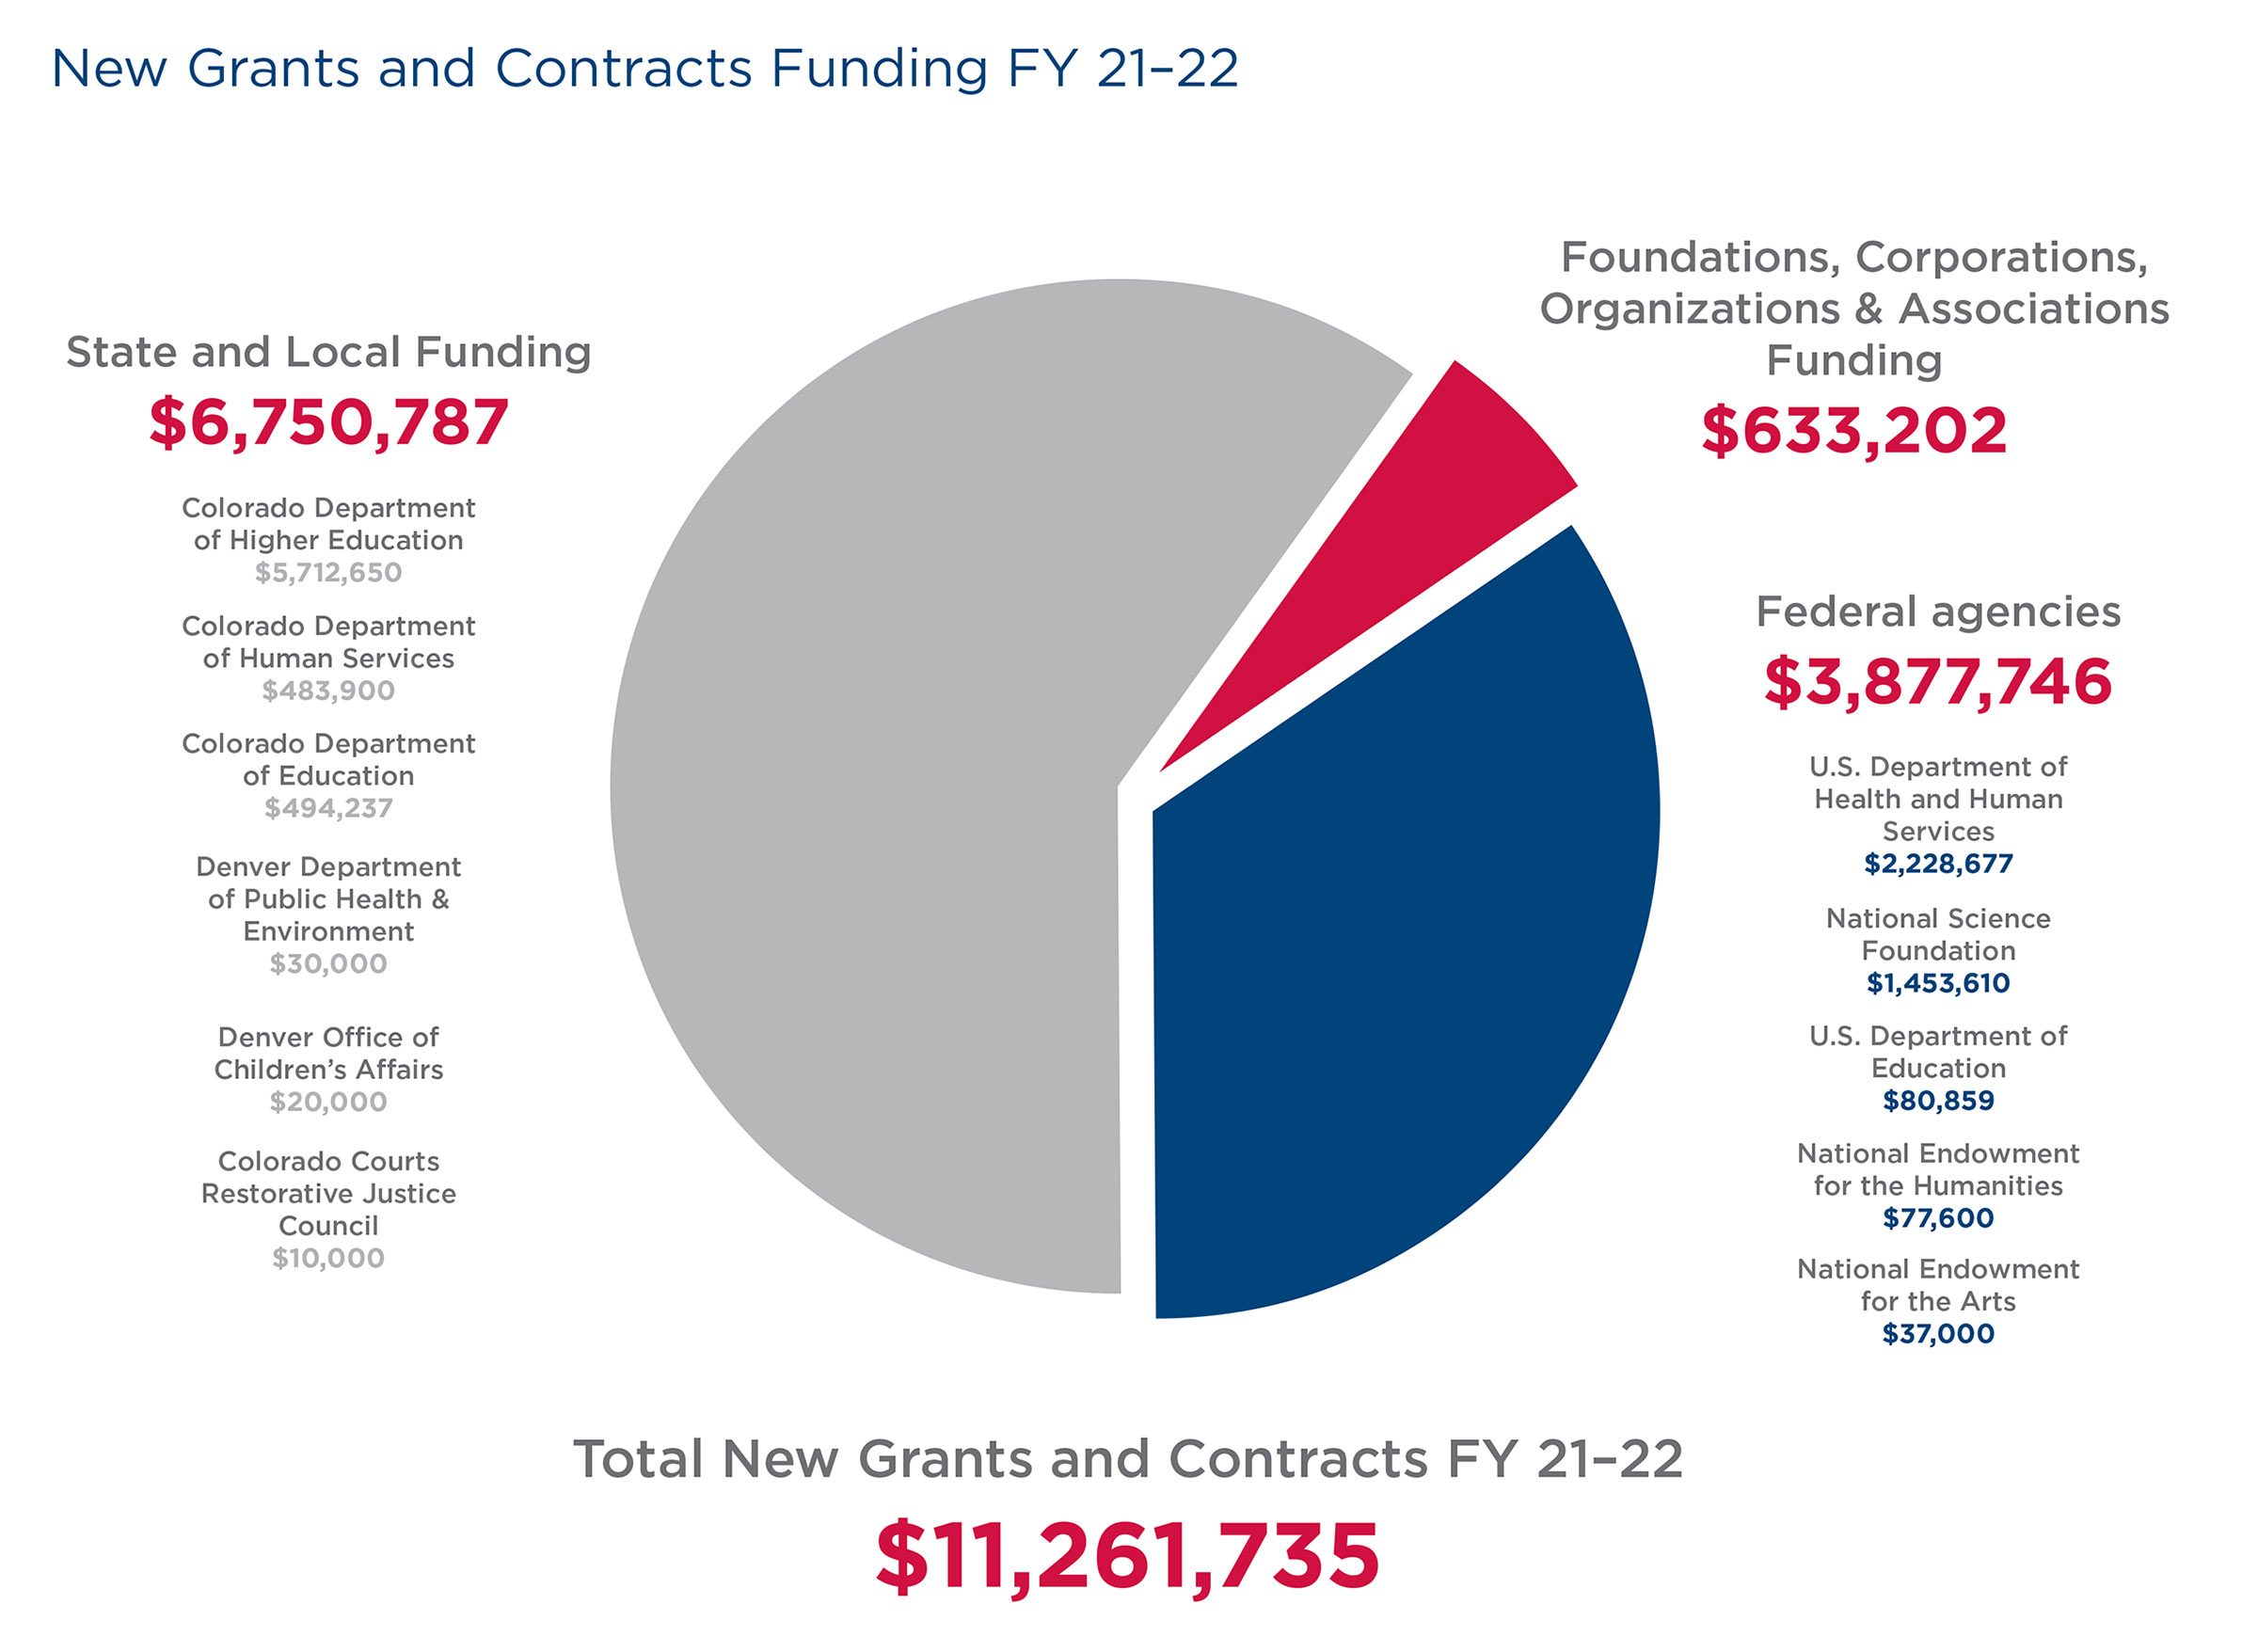 OSRP Grants and Contracts FY 21-22 v2